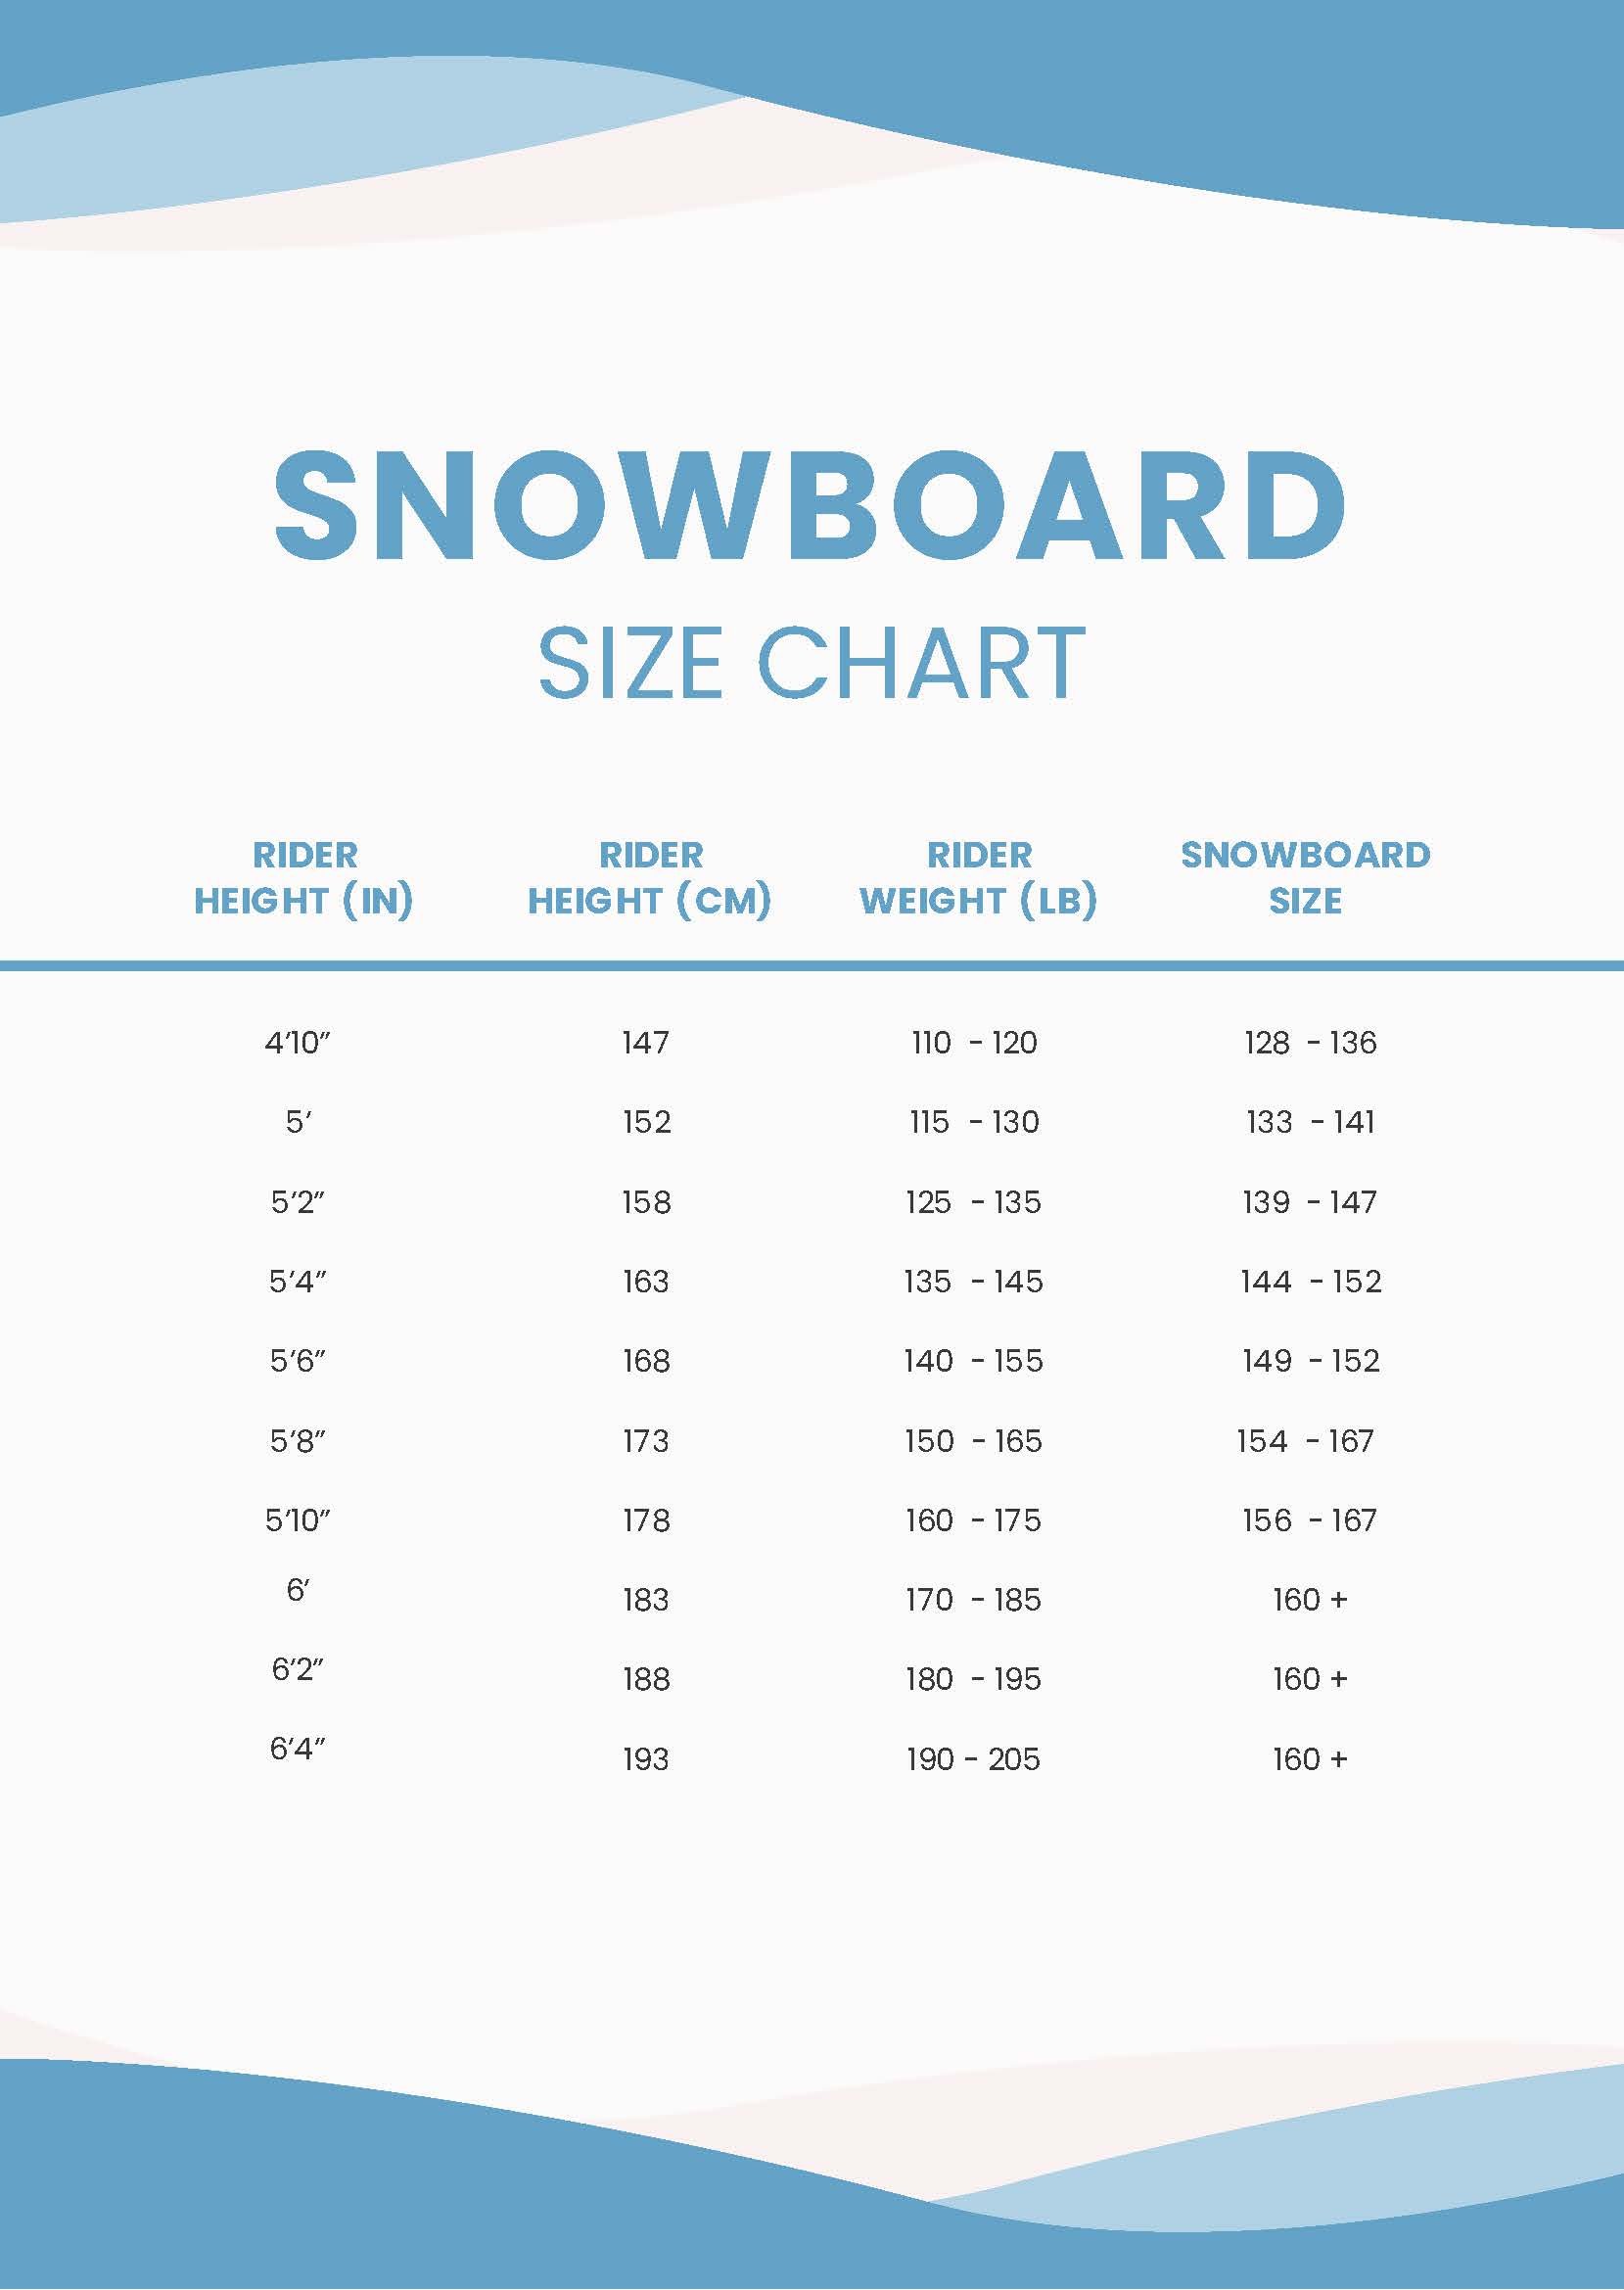 FREE Snowboard Size Chart Template - Download in Word, Google Docs, PDF ...